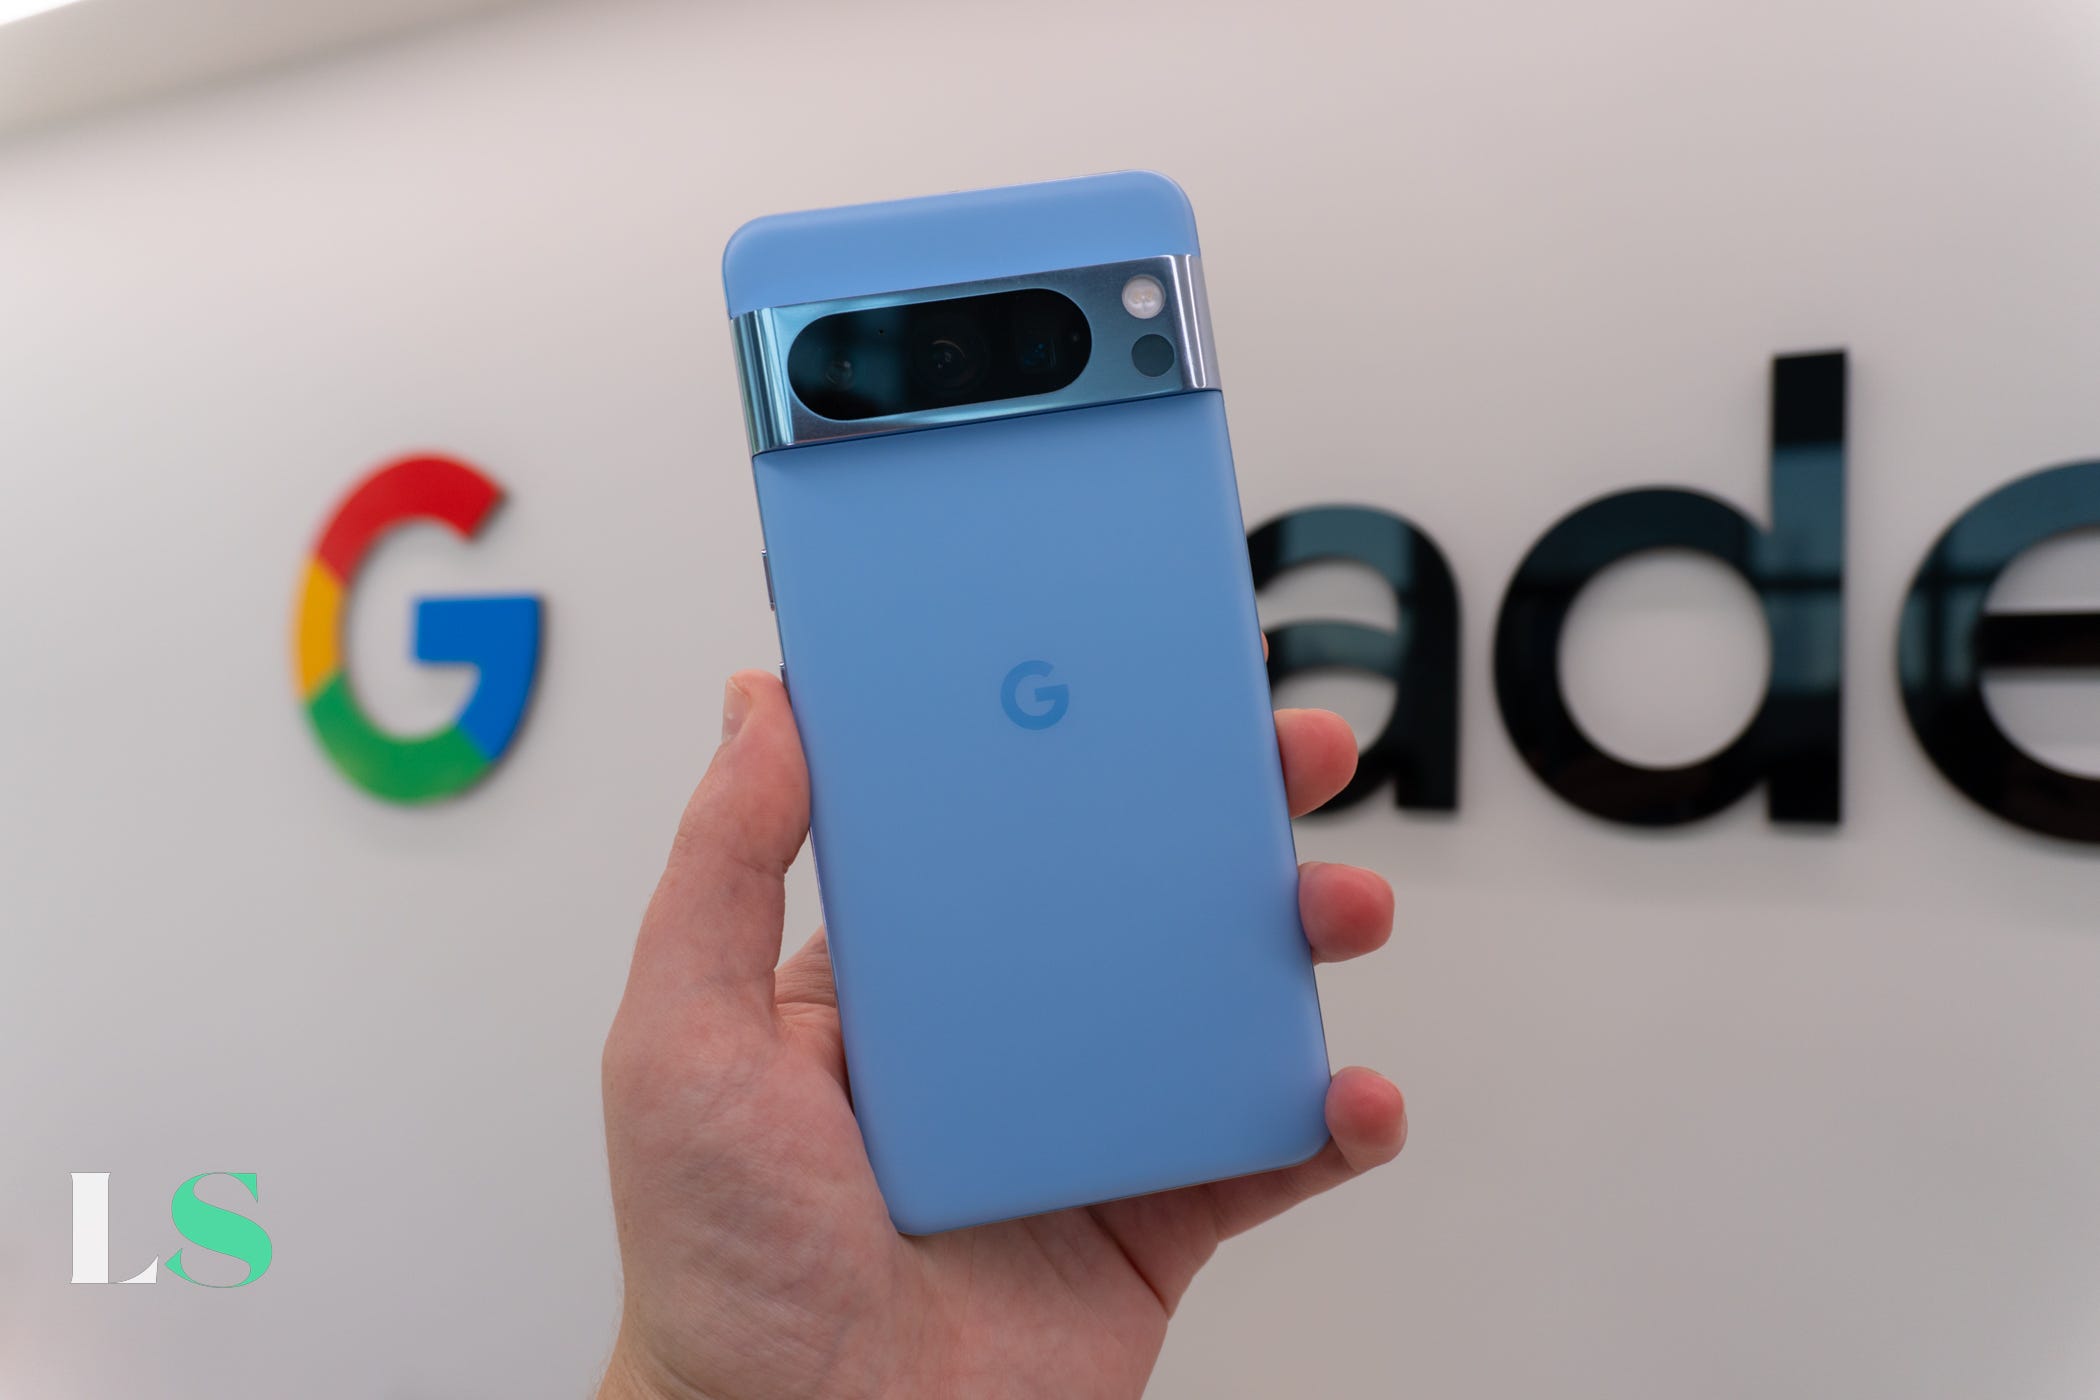 Google Pixel 8 Pro in Bay blue, photographed at the Made by Google event in New York City.